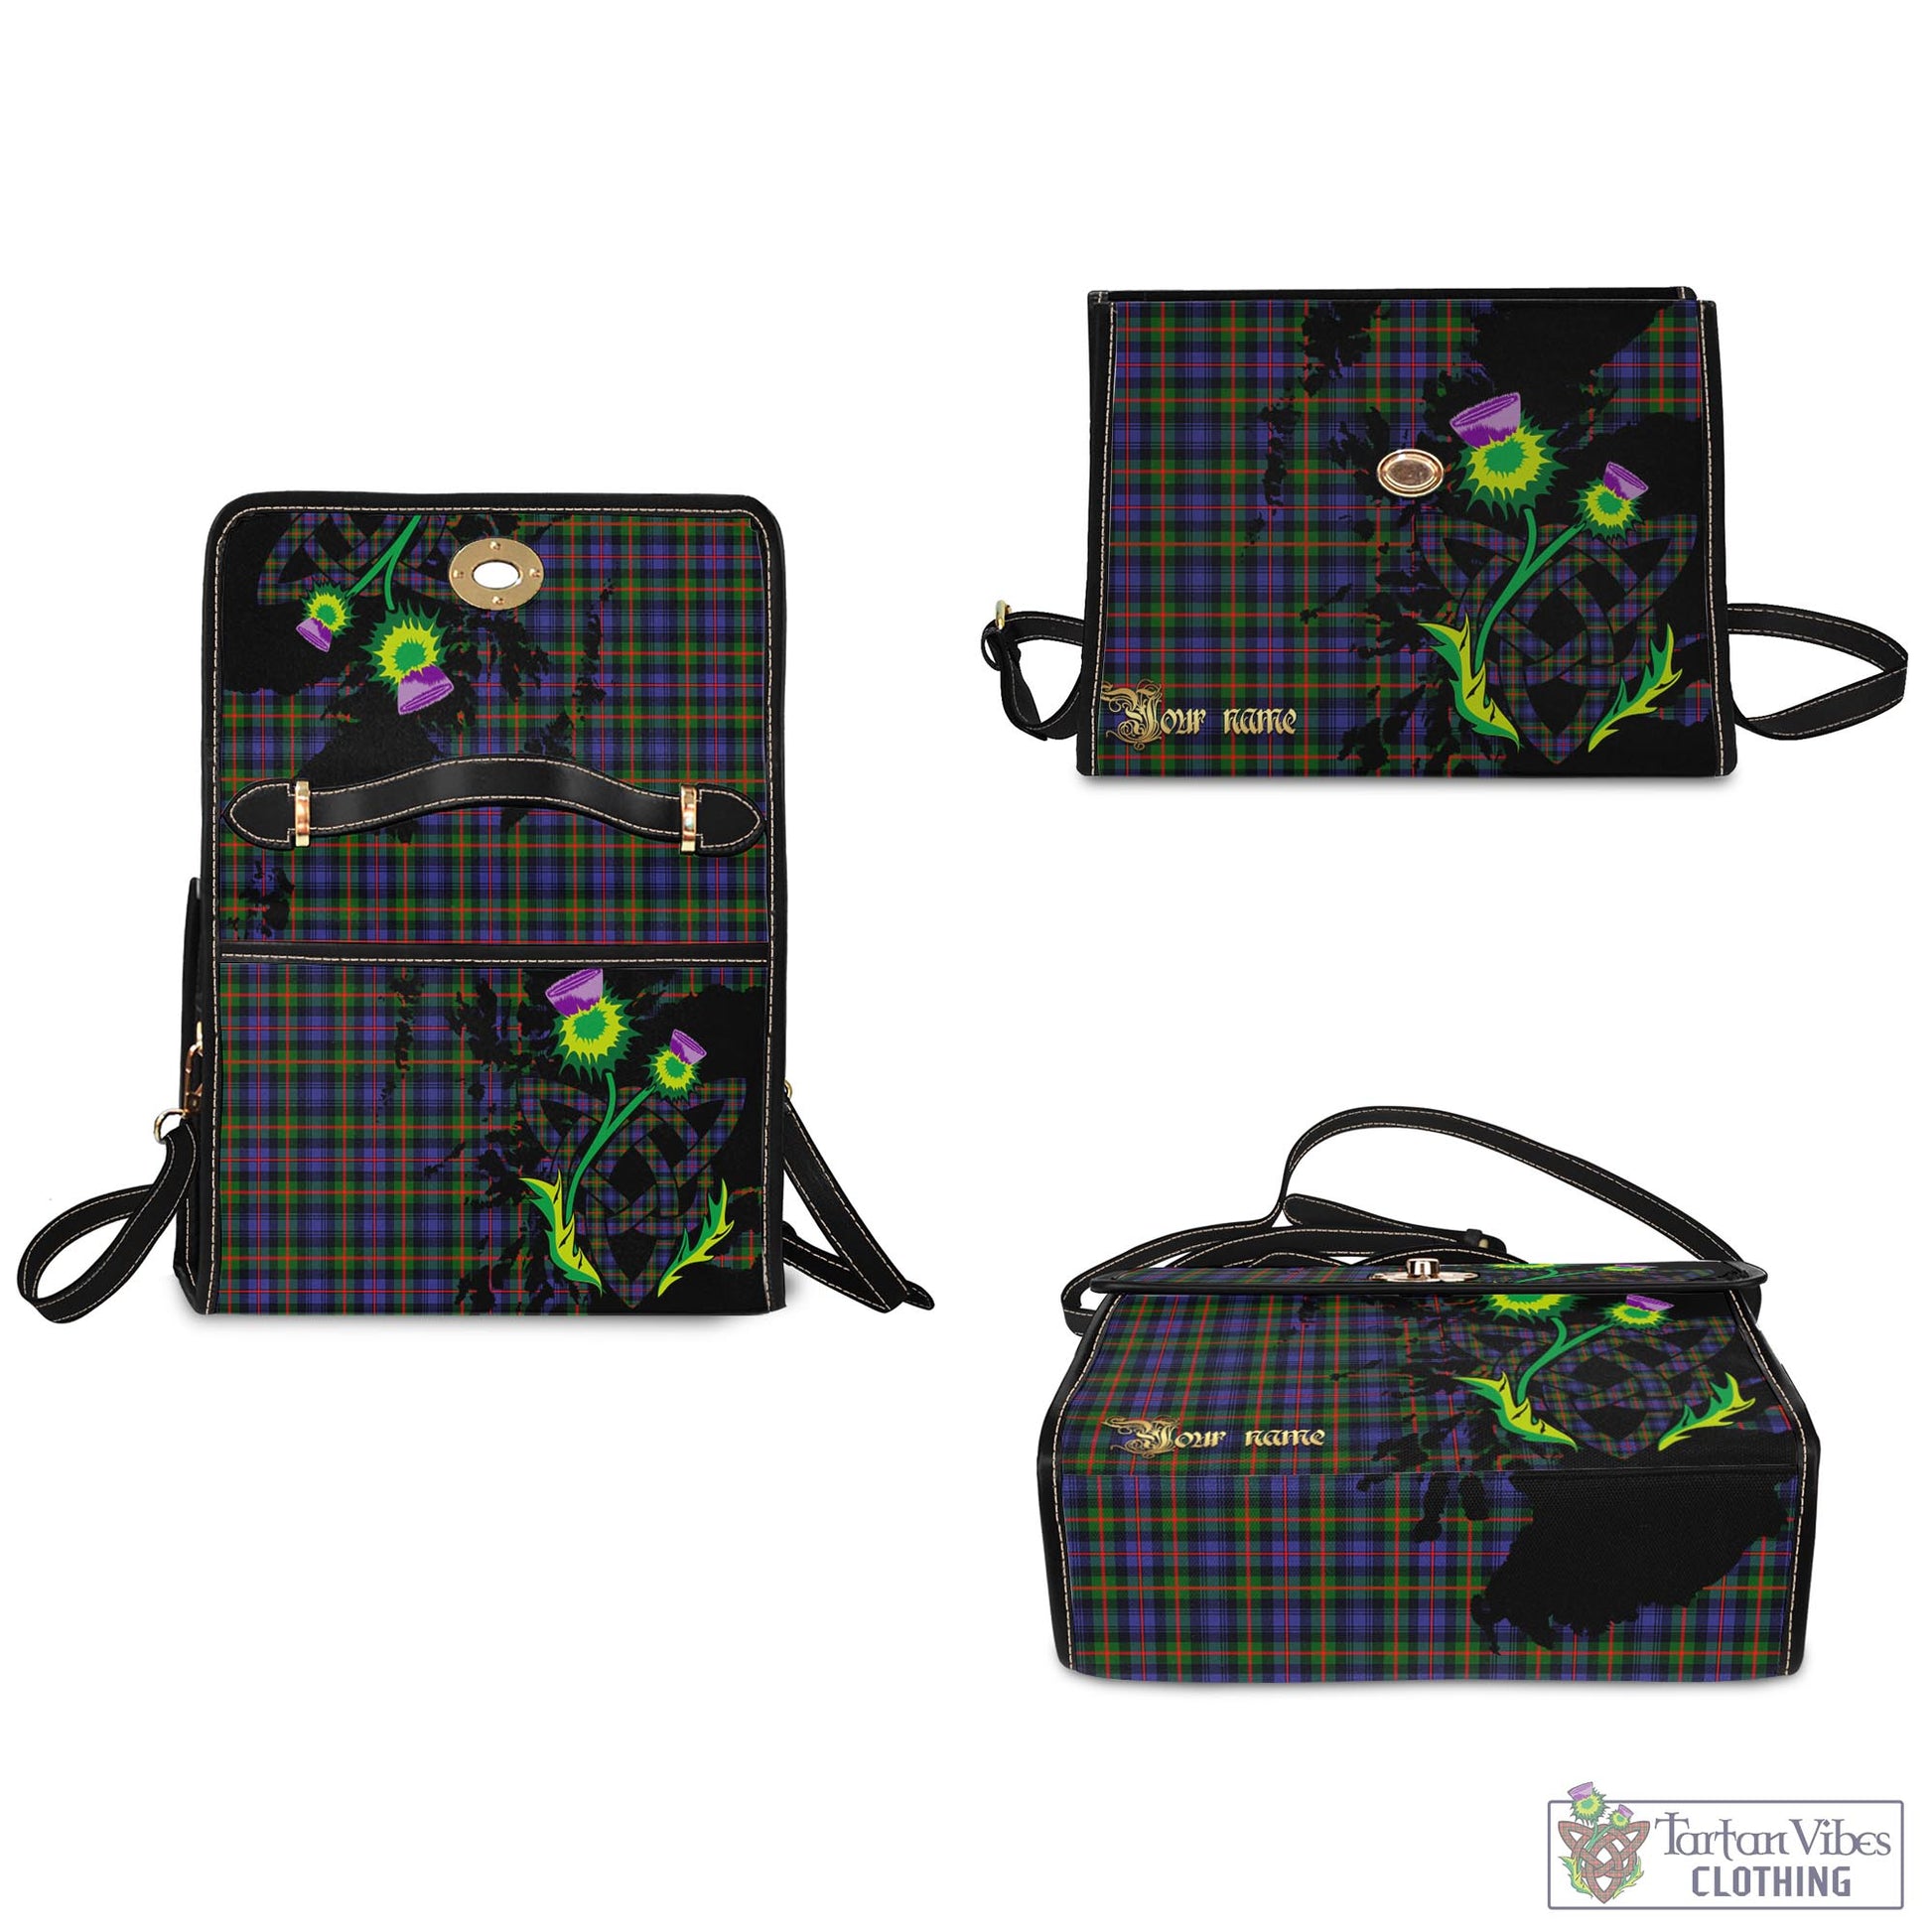 Tartan Vibes Clothing Fleming Tartan Waterproof Canvas Bag with Scotland Map and Thistle Celtic Accents